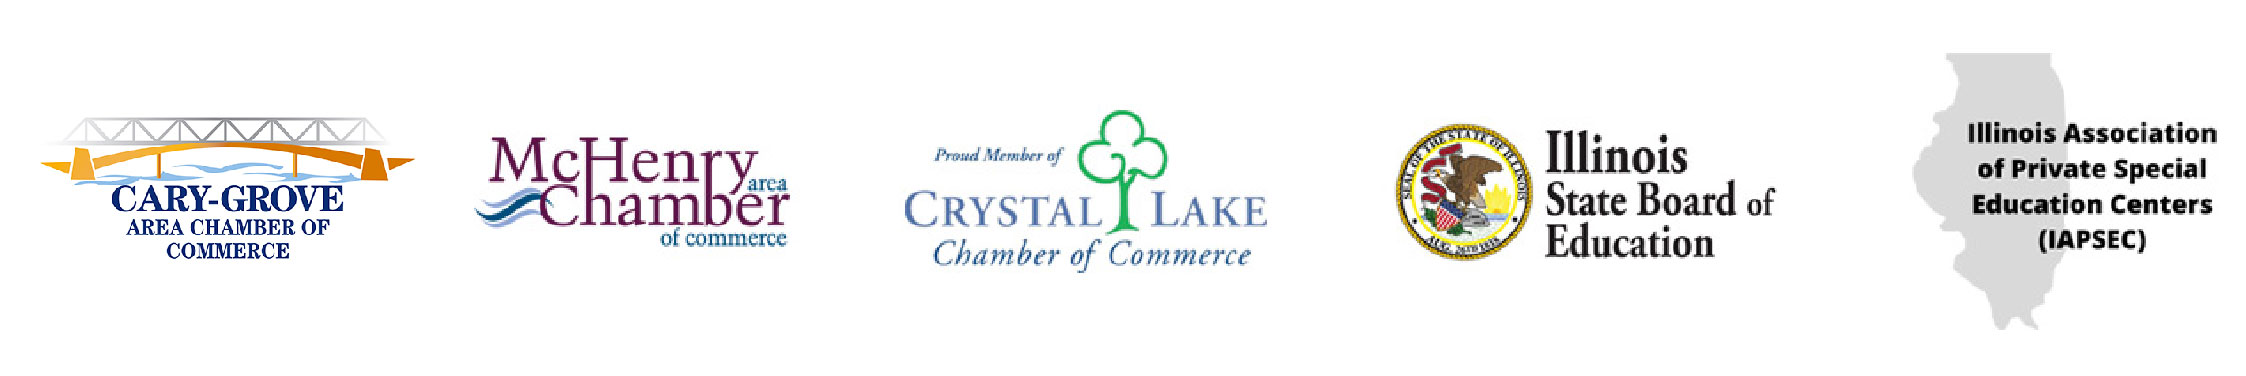 affiliation logos of mchenry chamber of commerce, crystal lake chamber of commerce, illinois state board of education, illinois association of private special education centers 